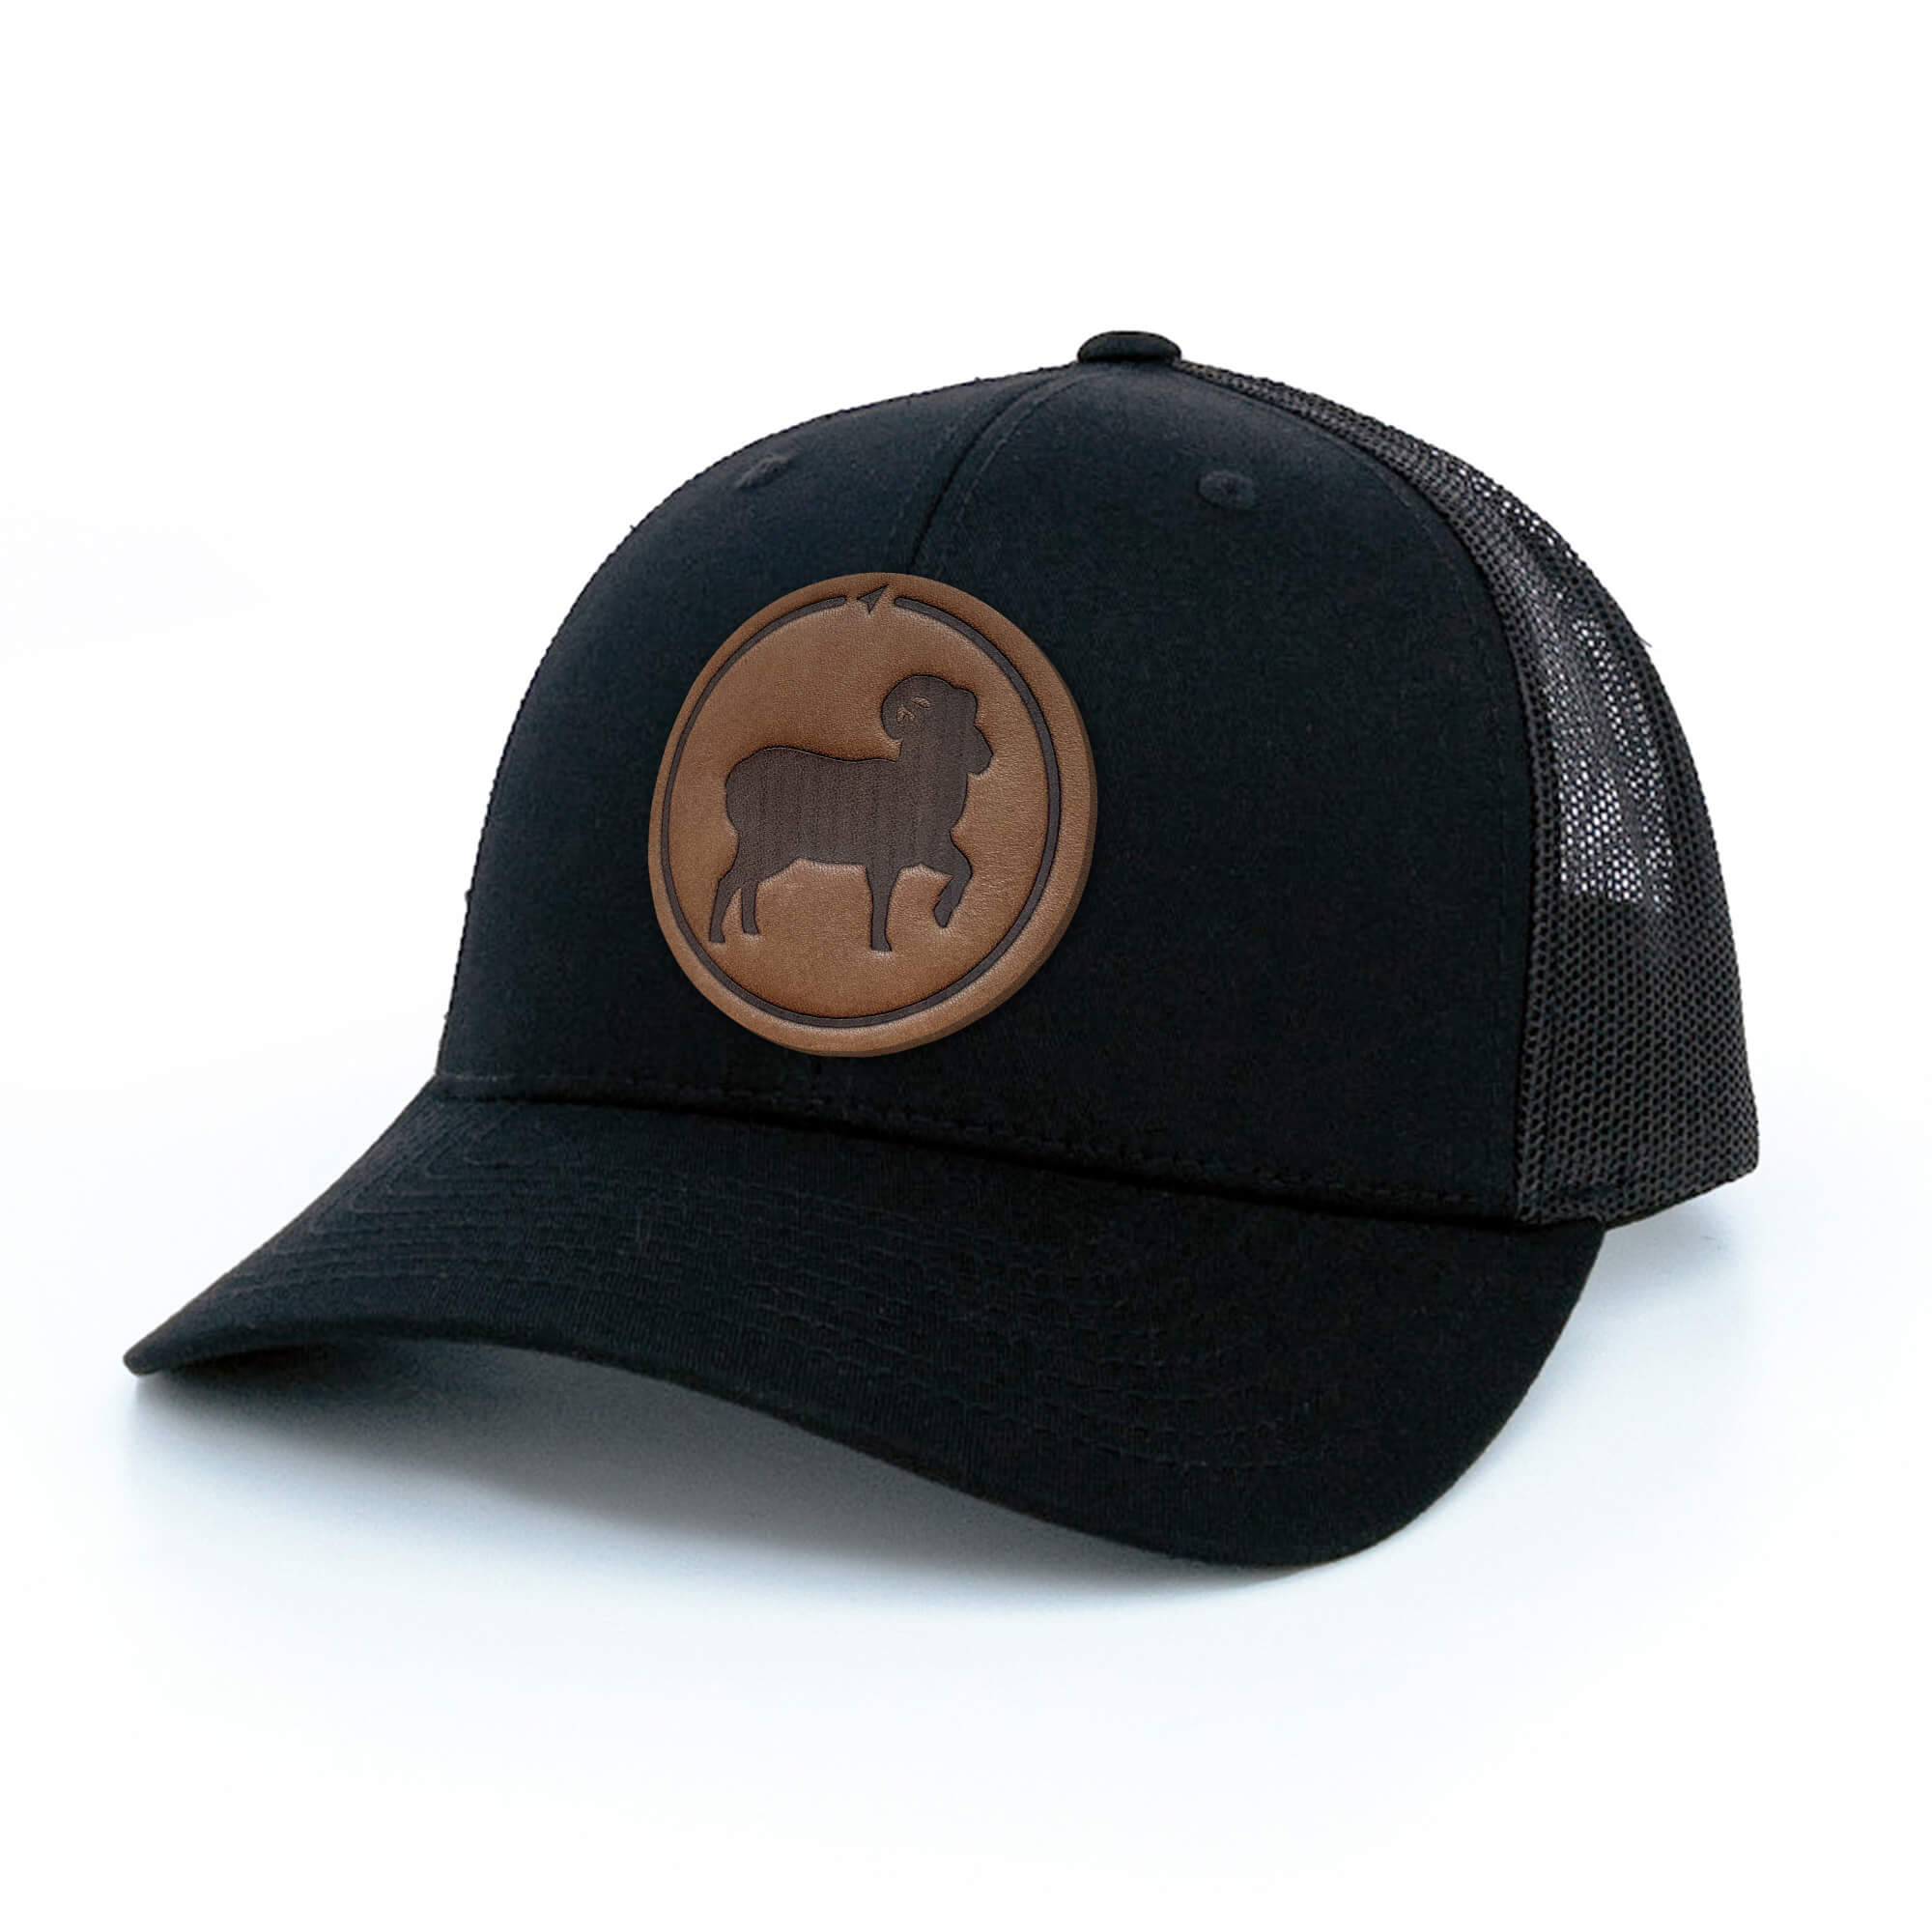 Black trucker hat with full-grain leather patch of a Bighorn Sheep | BLACK-004-002, CHARC-004-002, NAVY-004-002, HGREY-004-002, MOSS-004-002, BROWN-004-002